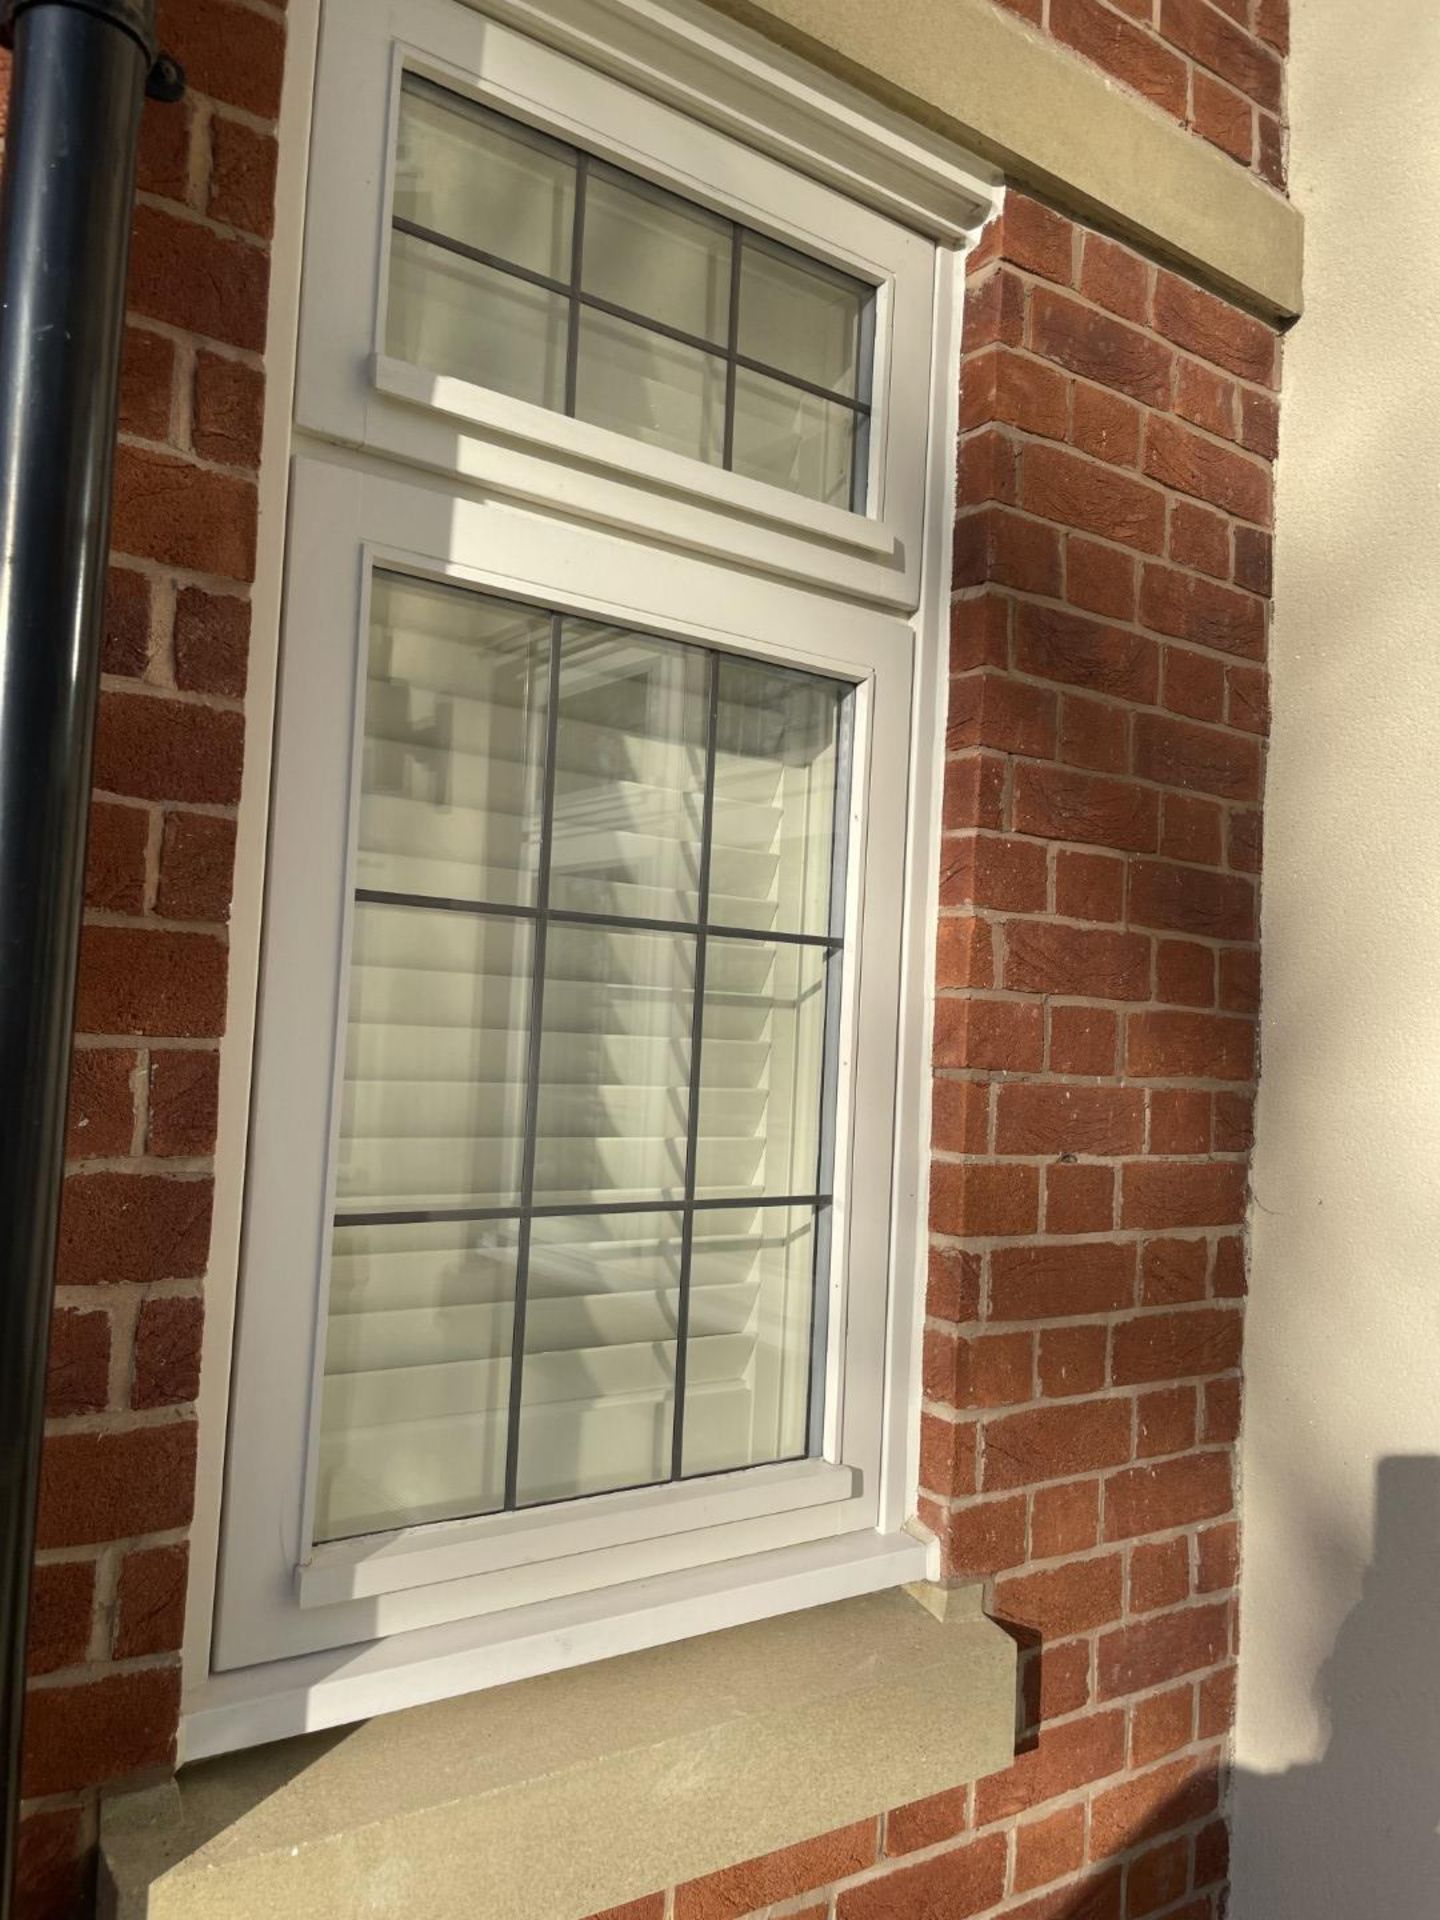 1 x Hardwood Timber Double Glazed Window Frames fitted with Shutter Blinds, In White - Ref: PAN106 - Image 10 of 23